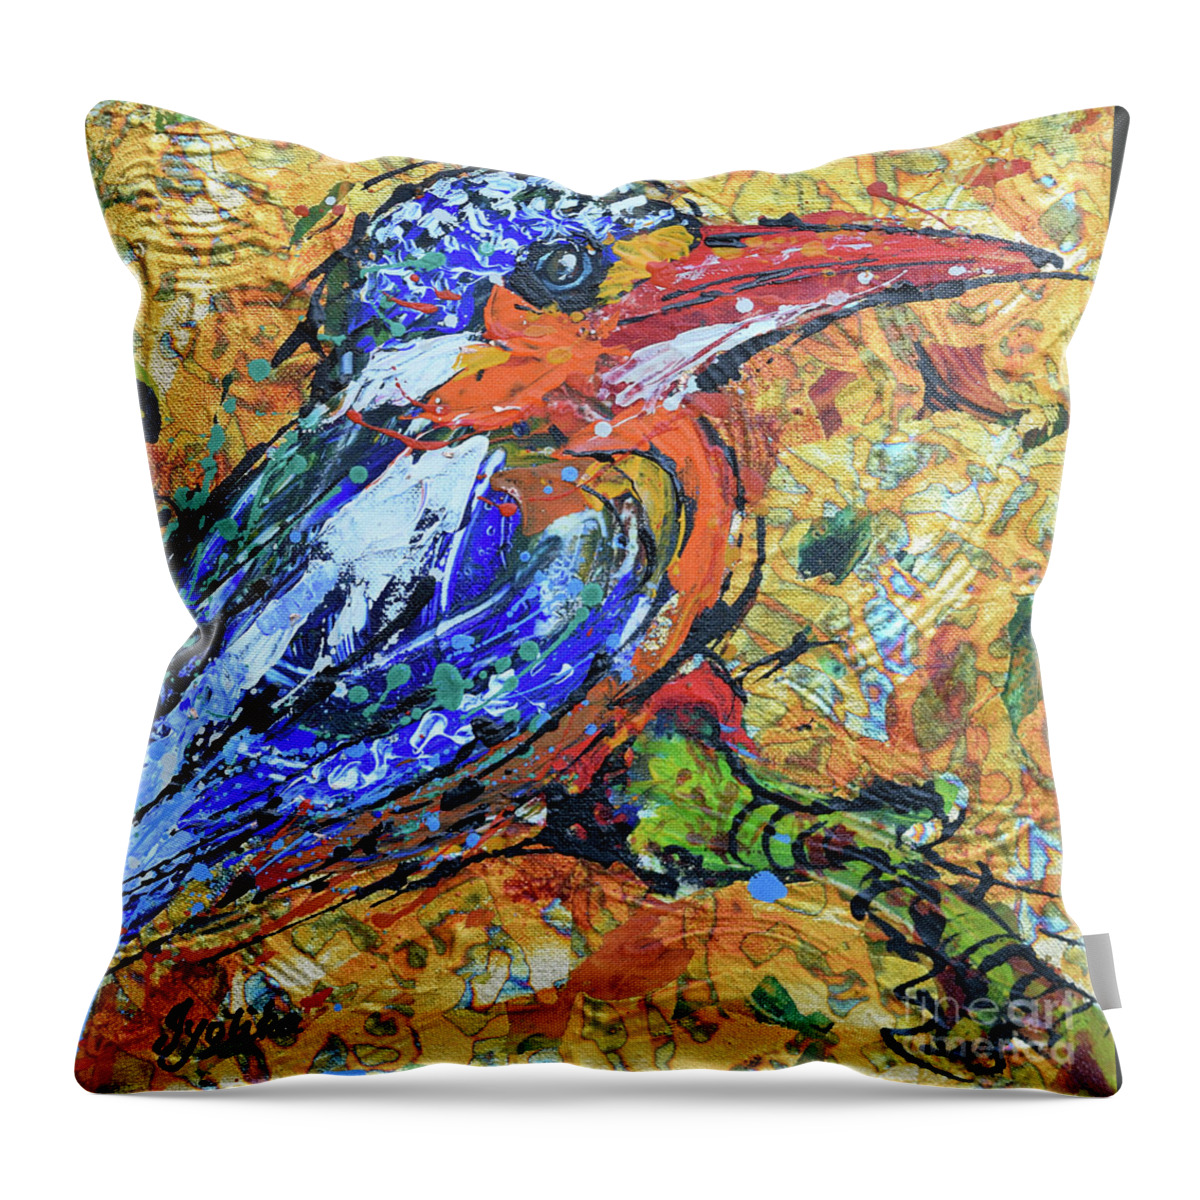  Throw Pillow featuring the painting Kingfisher_1 by Jyotika Shroff